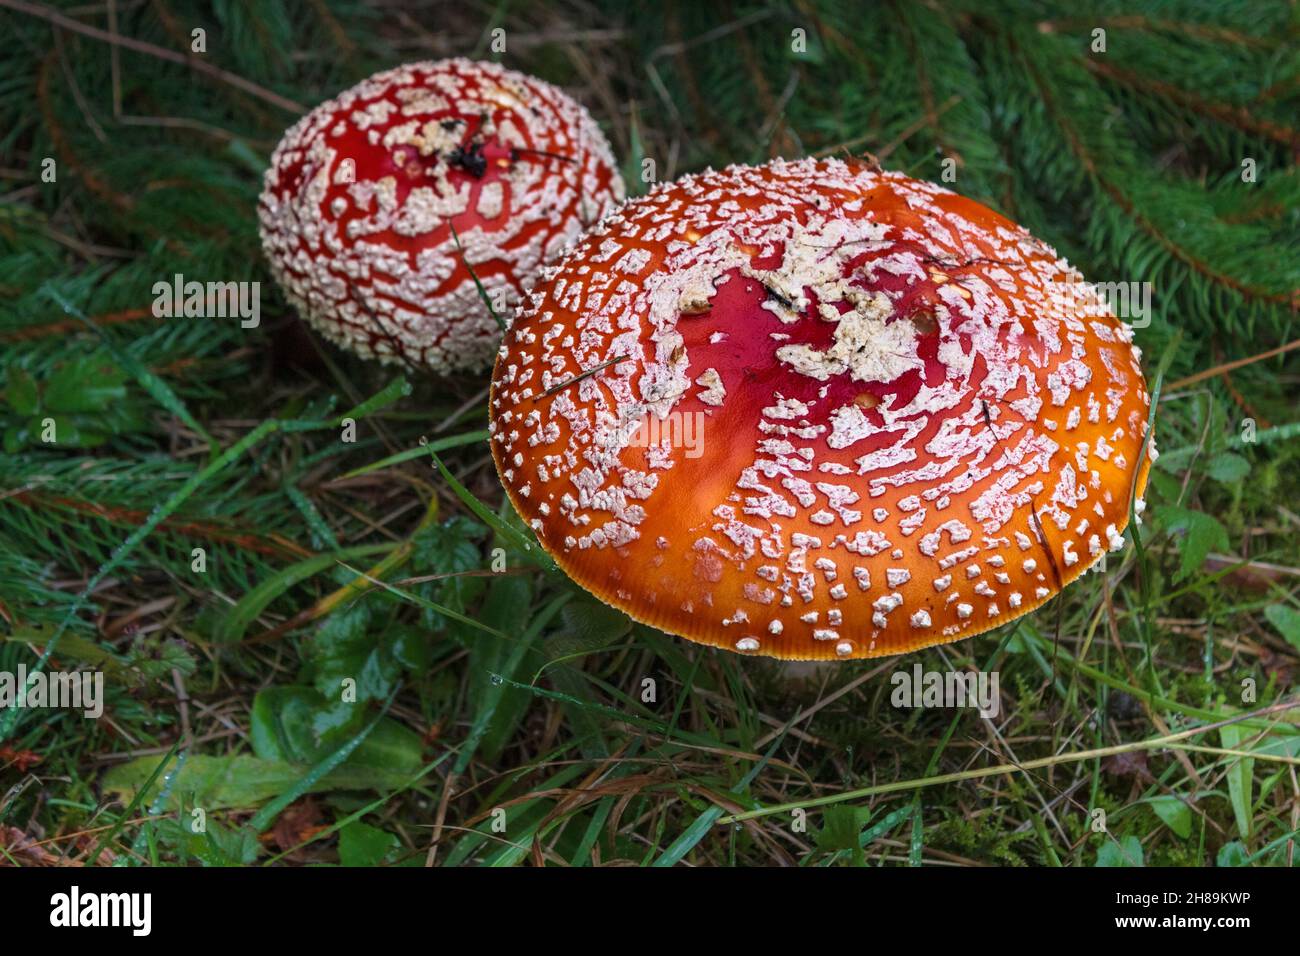 The round, brightly coloured, warty caps of two Amanita muscaria (American fly agaric) mushrooms stand out conspicuously in their woodland habitat. Stock Photo